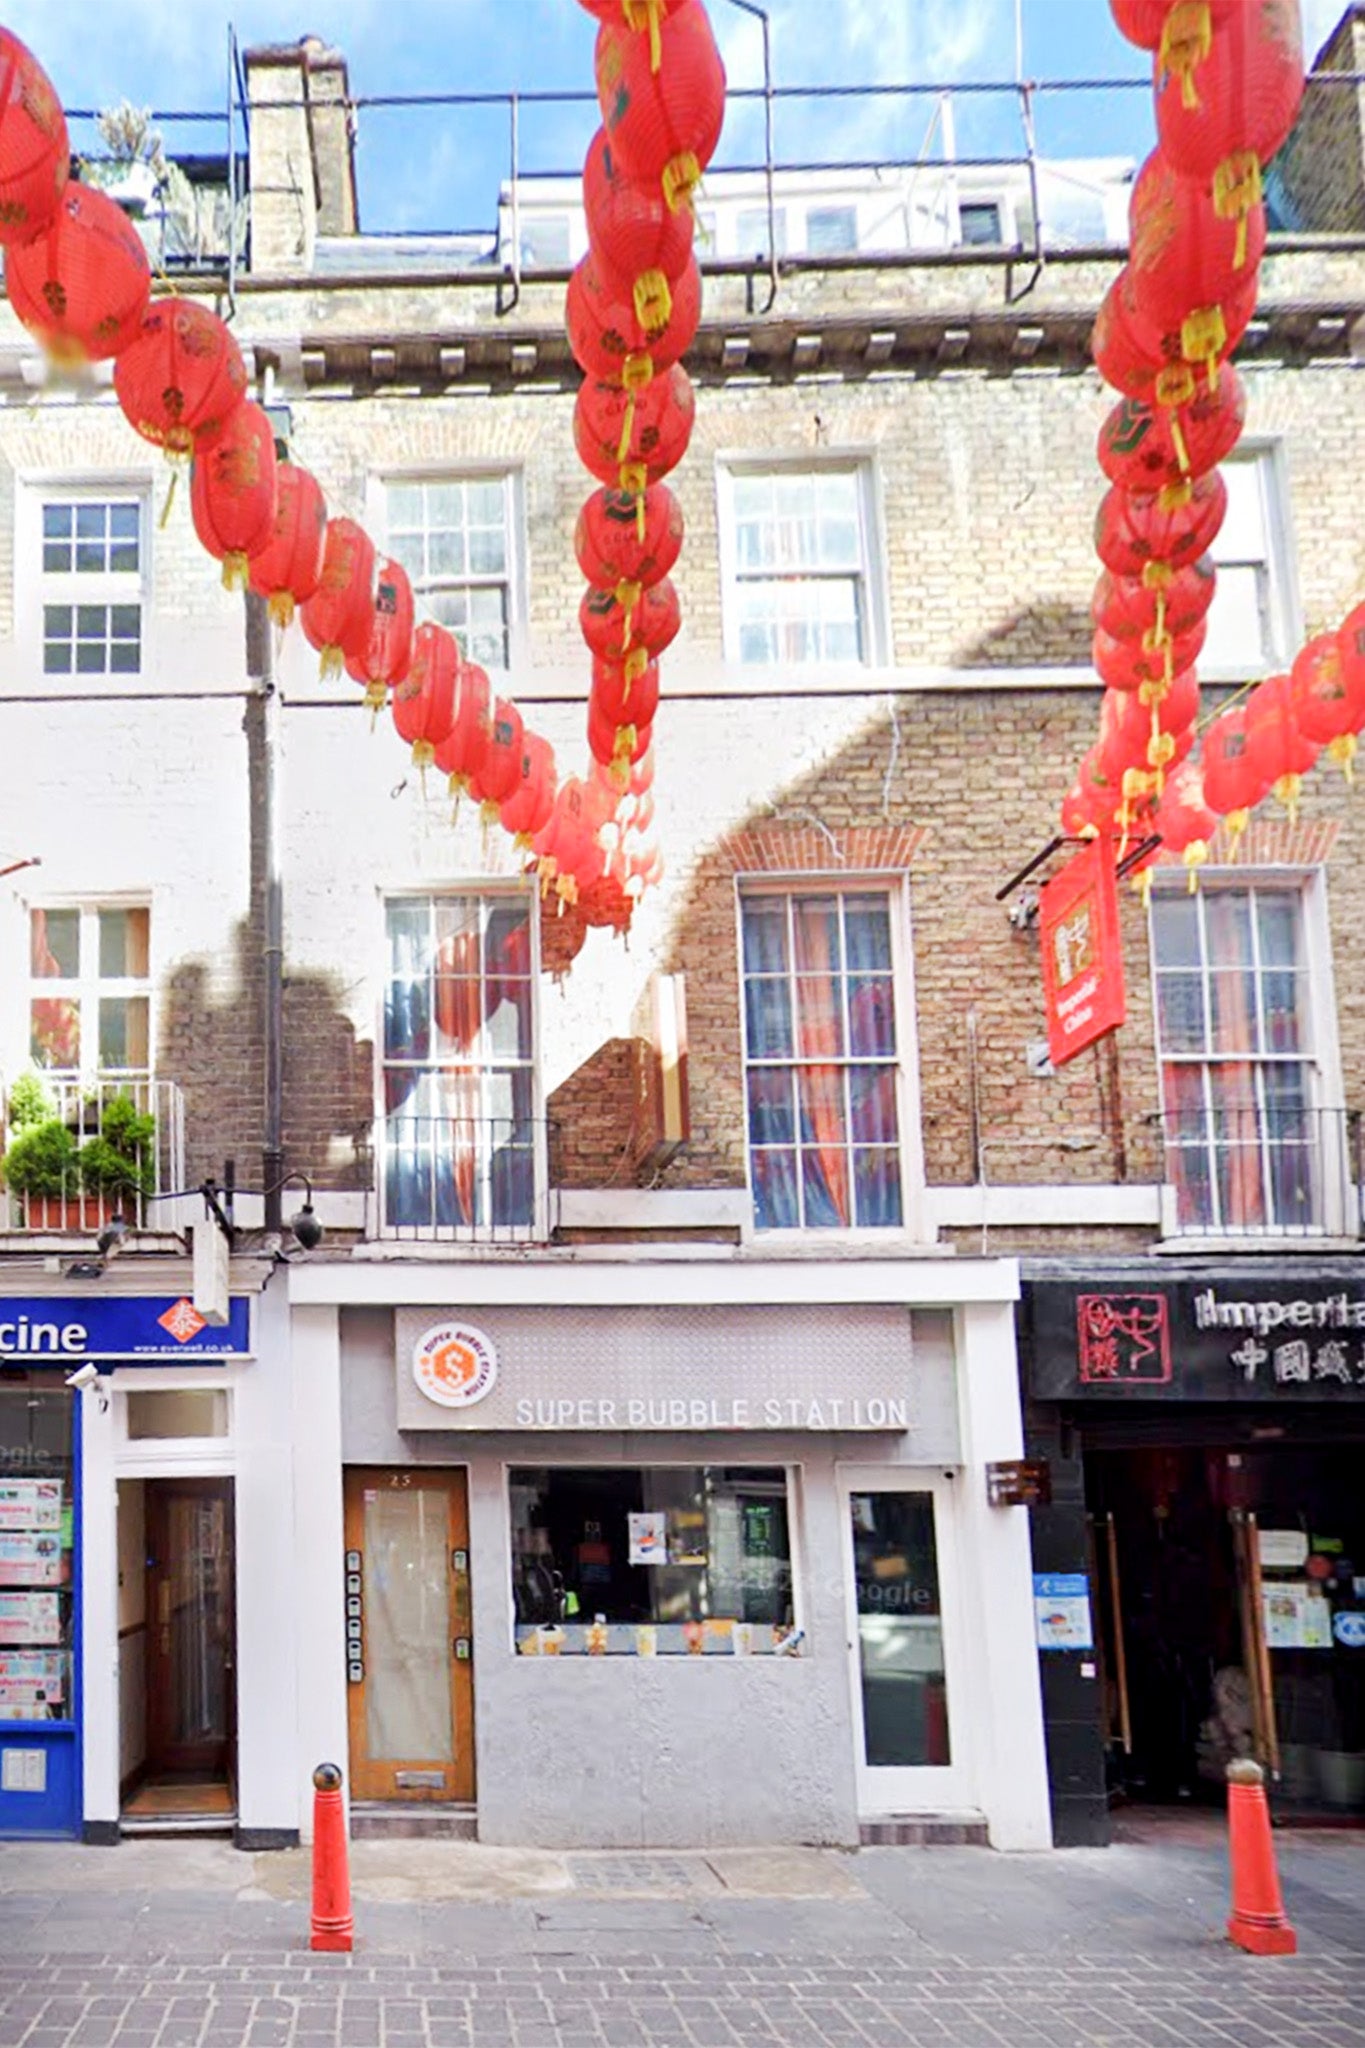 The Airbnb is located in the heart of Chinatown